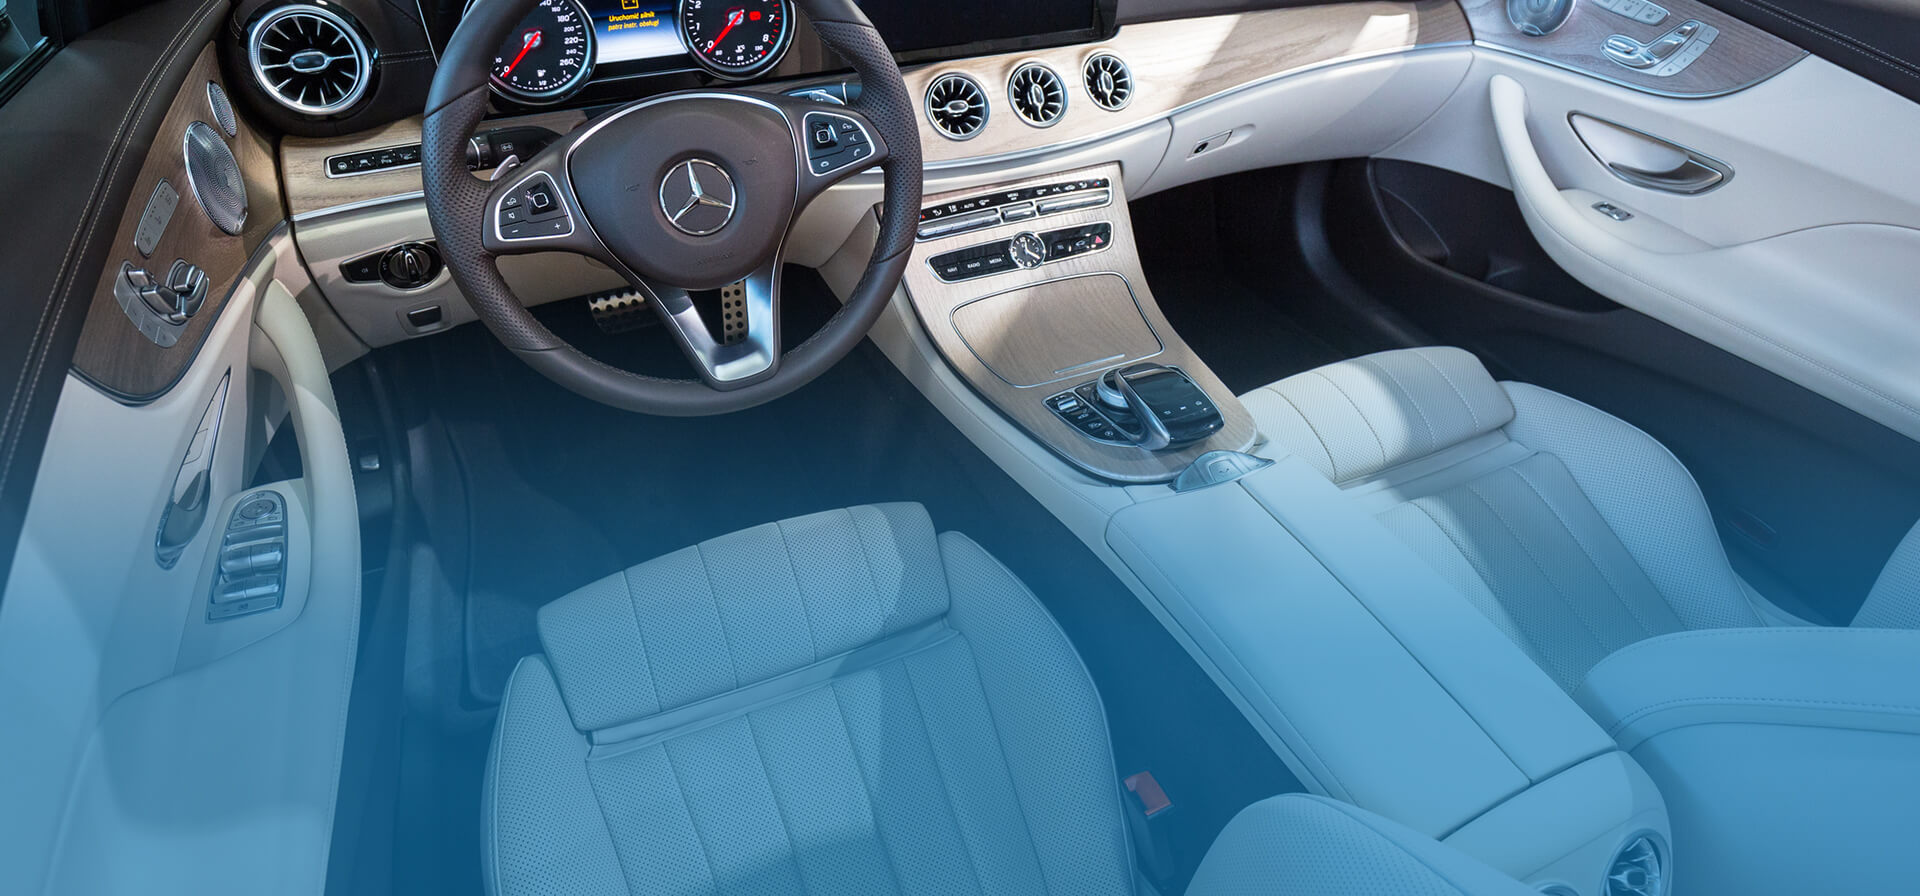 Car Interior Cleaning Services